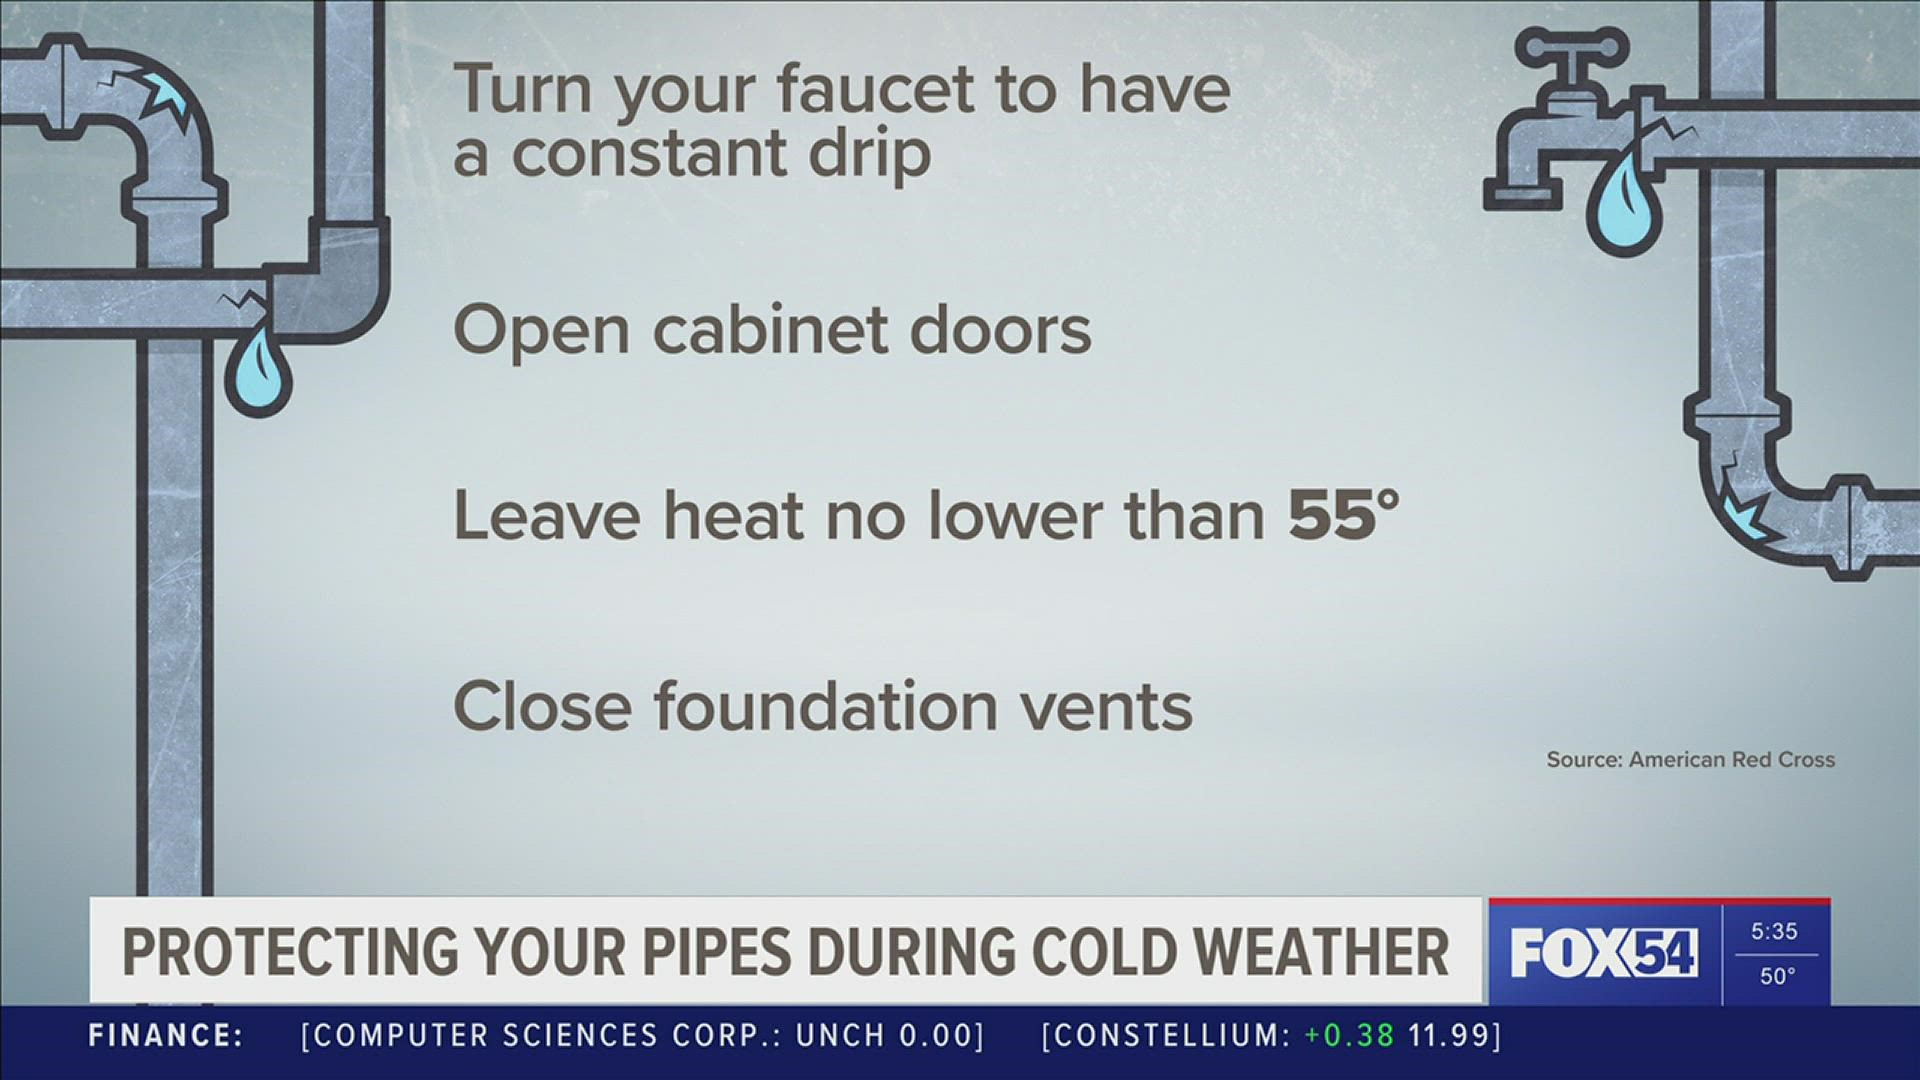 How can you protect your pipes from freezing during extreme cold?